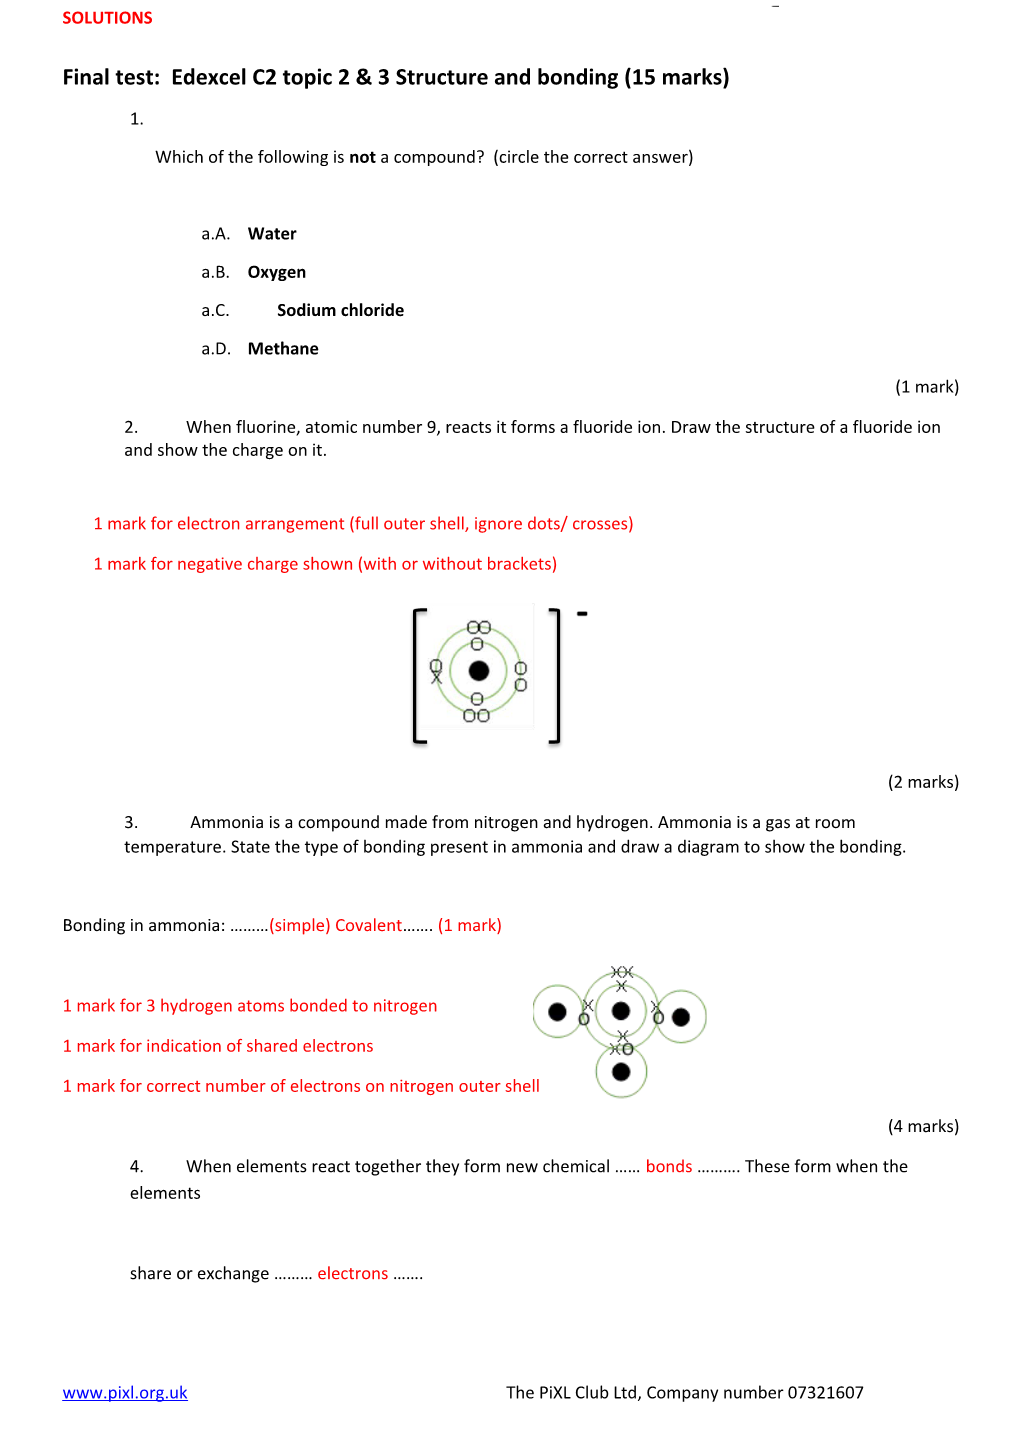 Final Test: Edexcel C2 Topic 2 & 3 Structure and Bonding (15 Marks)